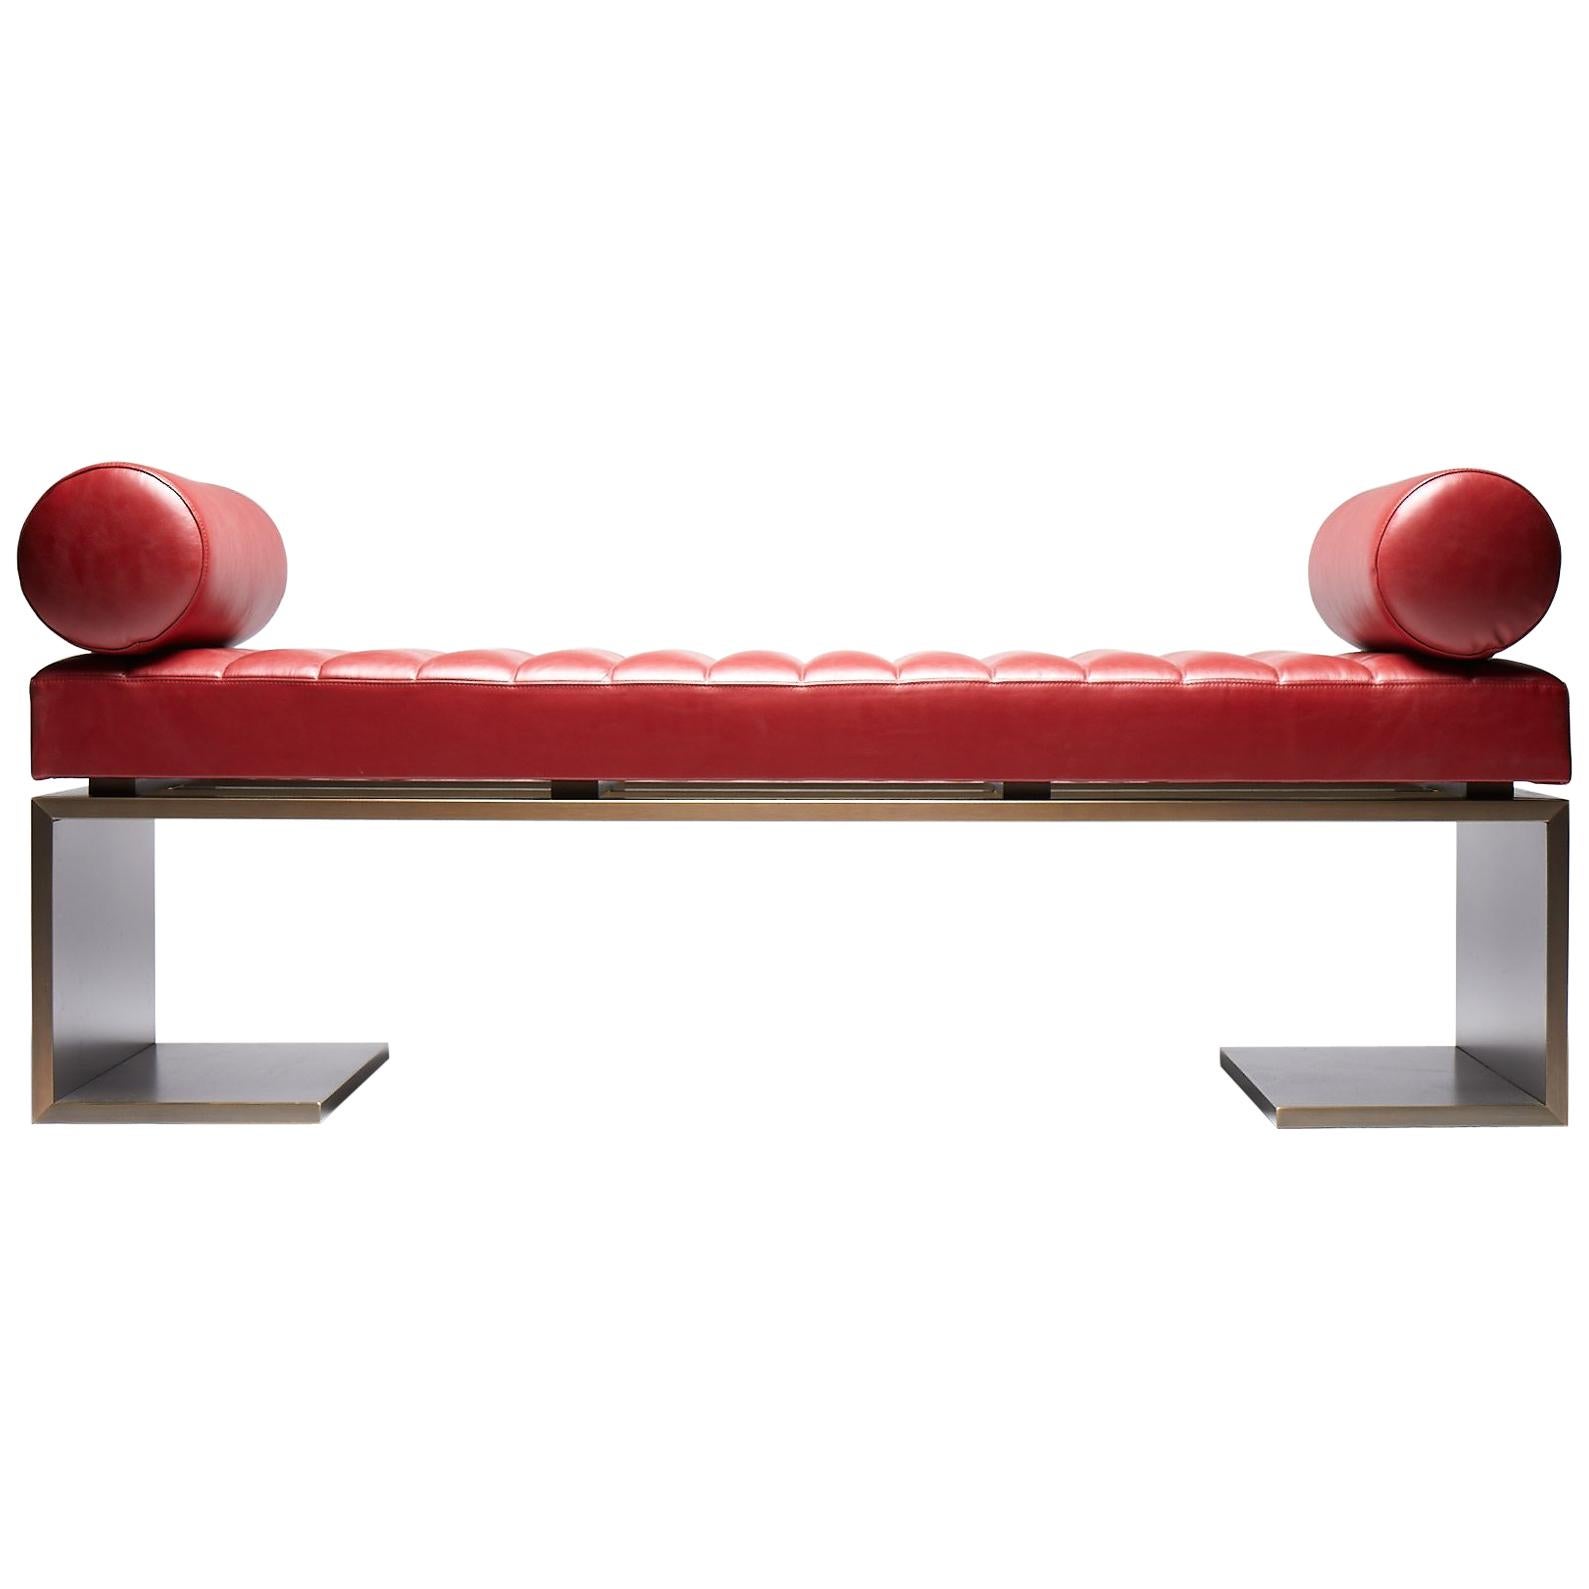 Bronze & Leather Bench, KIMANI, by Reda Amalou Desgin, 2018 - Gallery Collection For Sale